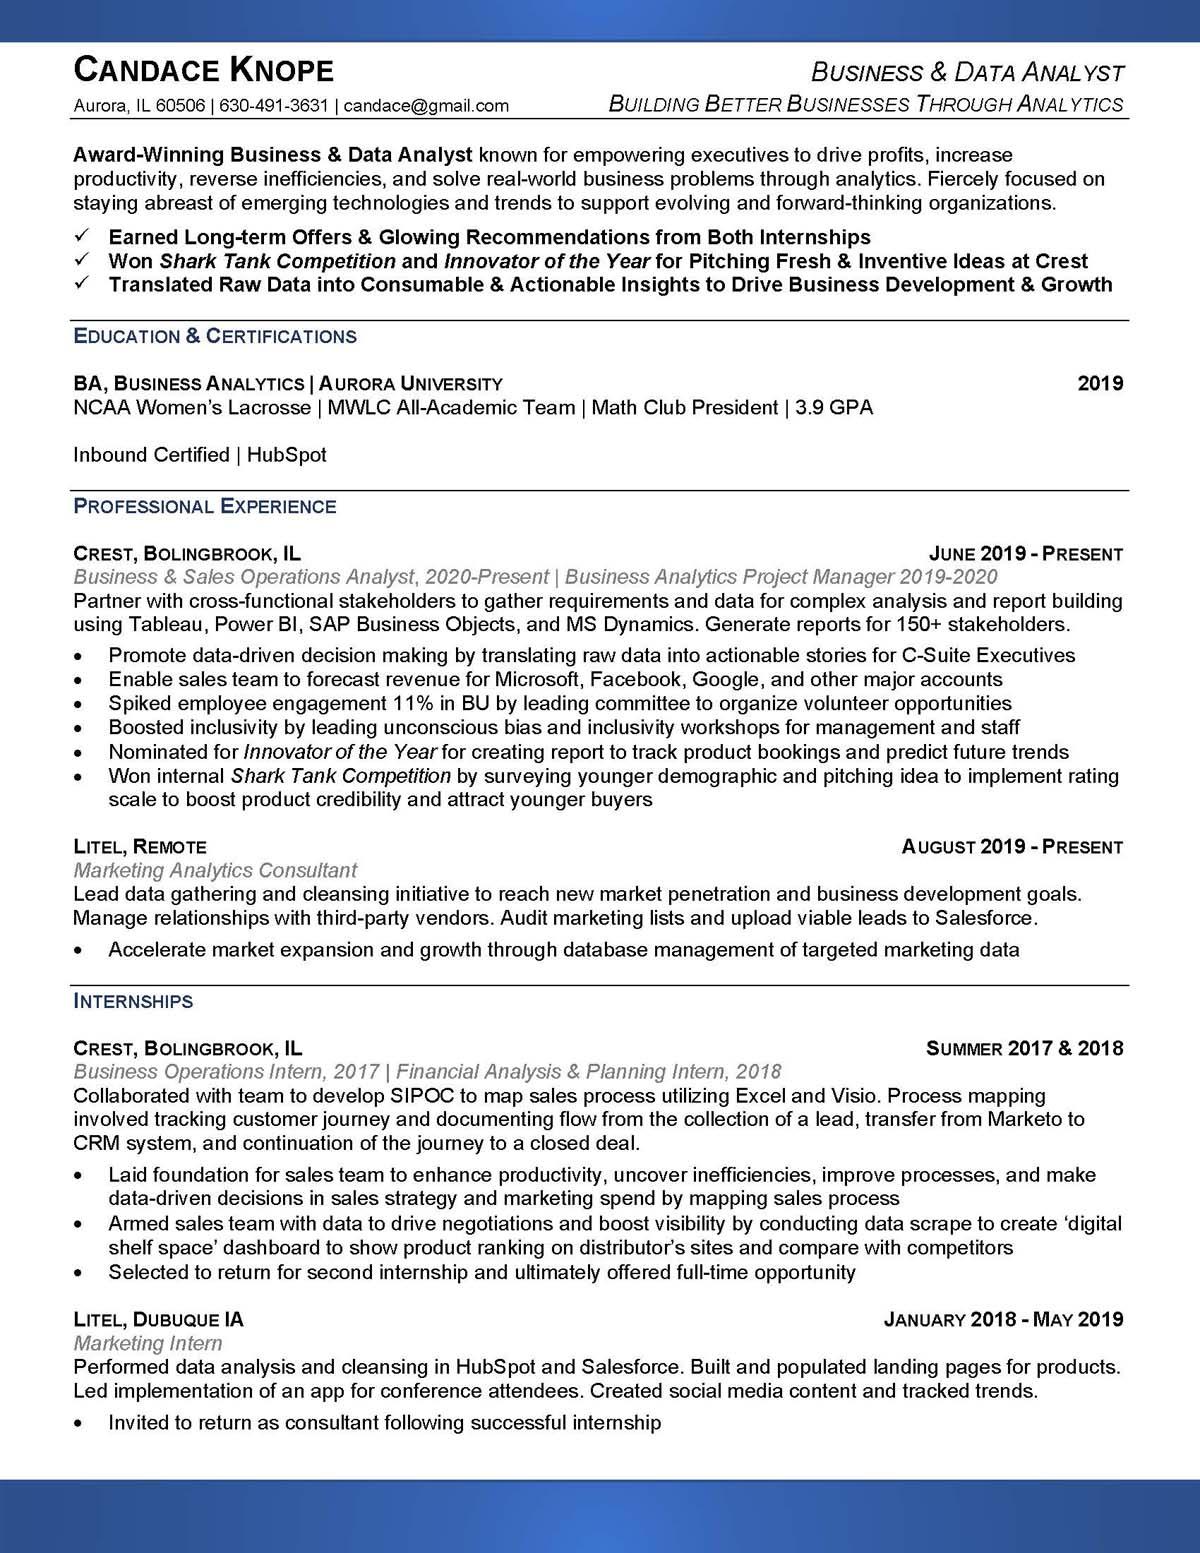 Sample resume: Business Administration and Management, Low Experience, Chronological